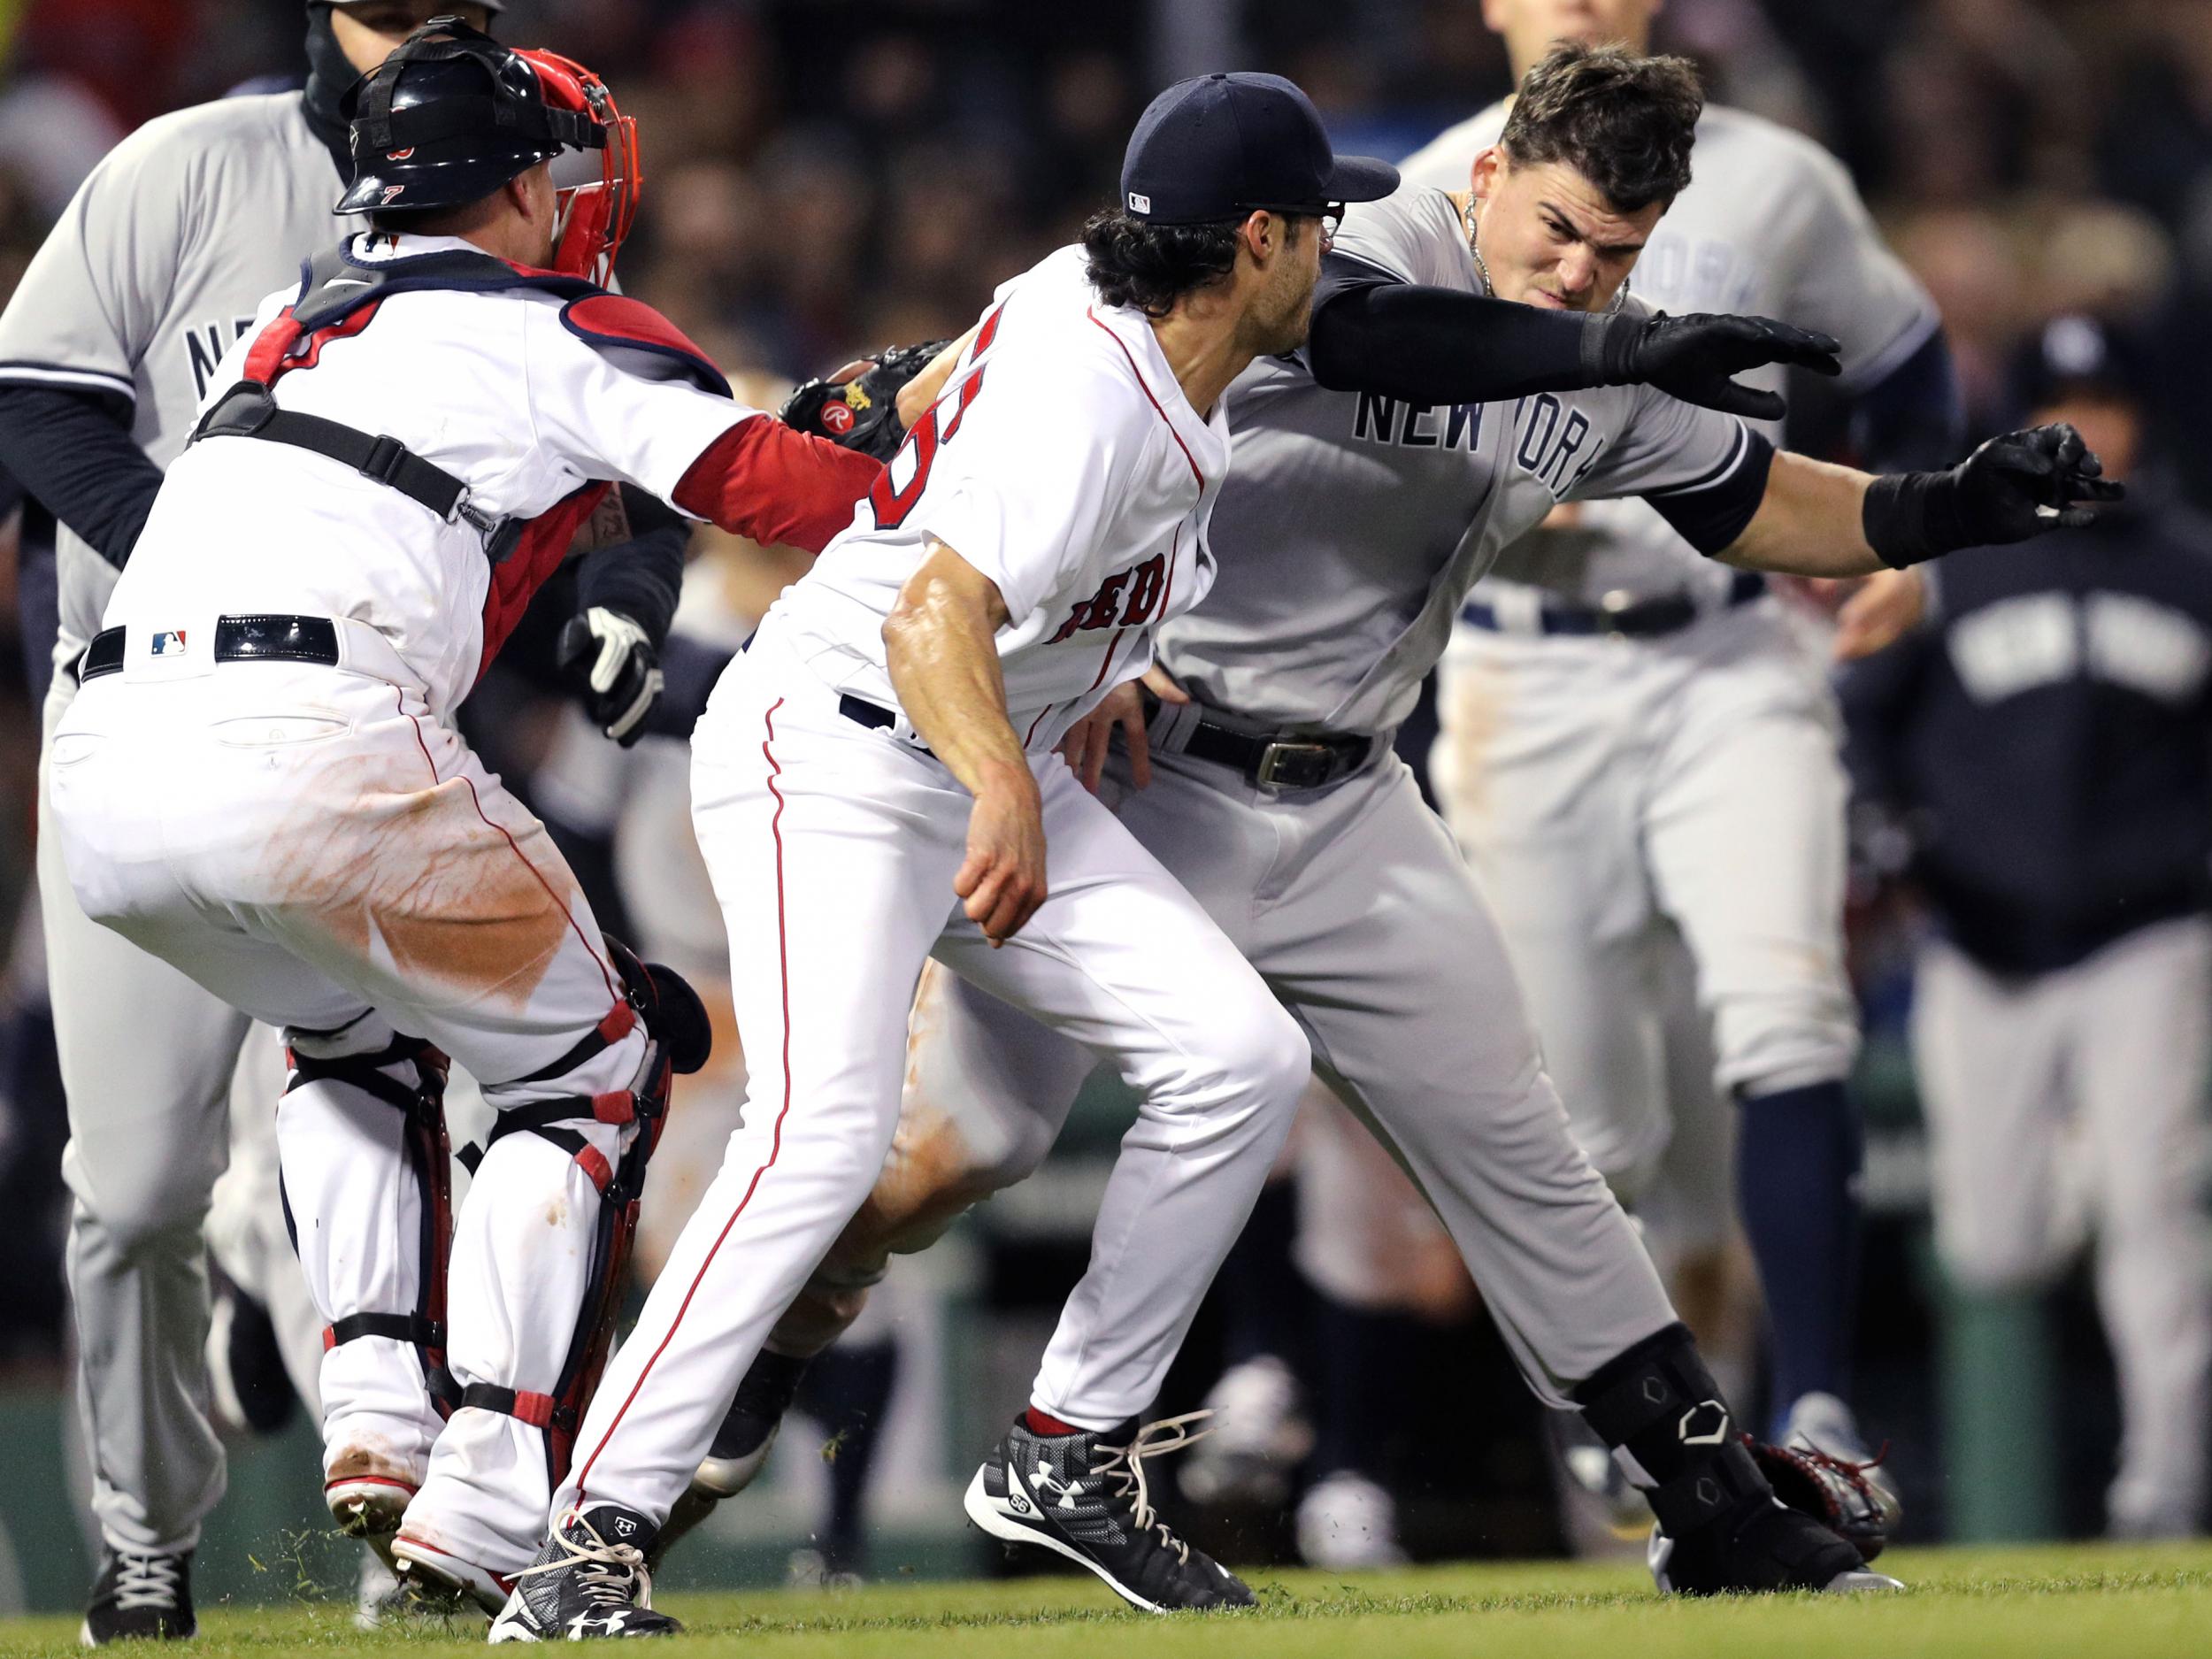 New York Yankees and Boston Red Sox brawl after batter hit by 98mph pitch, The Independent